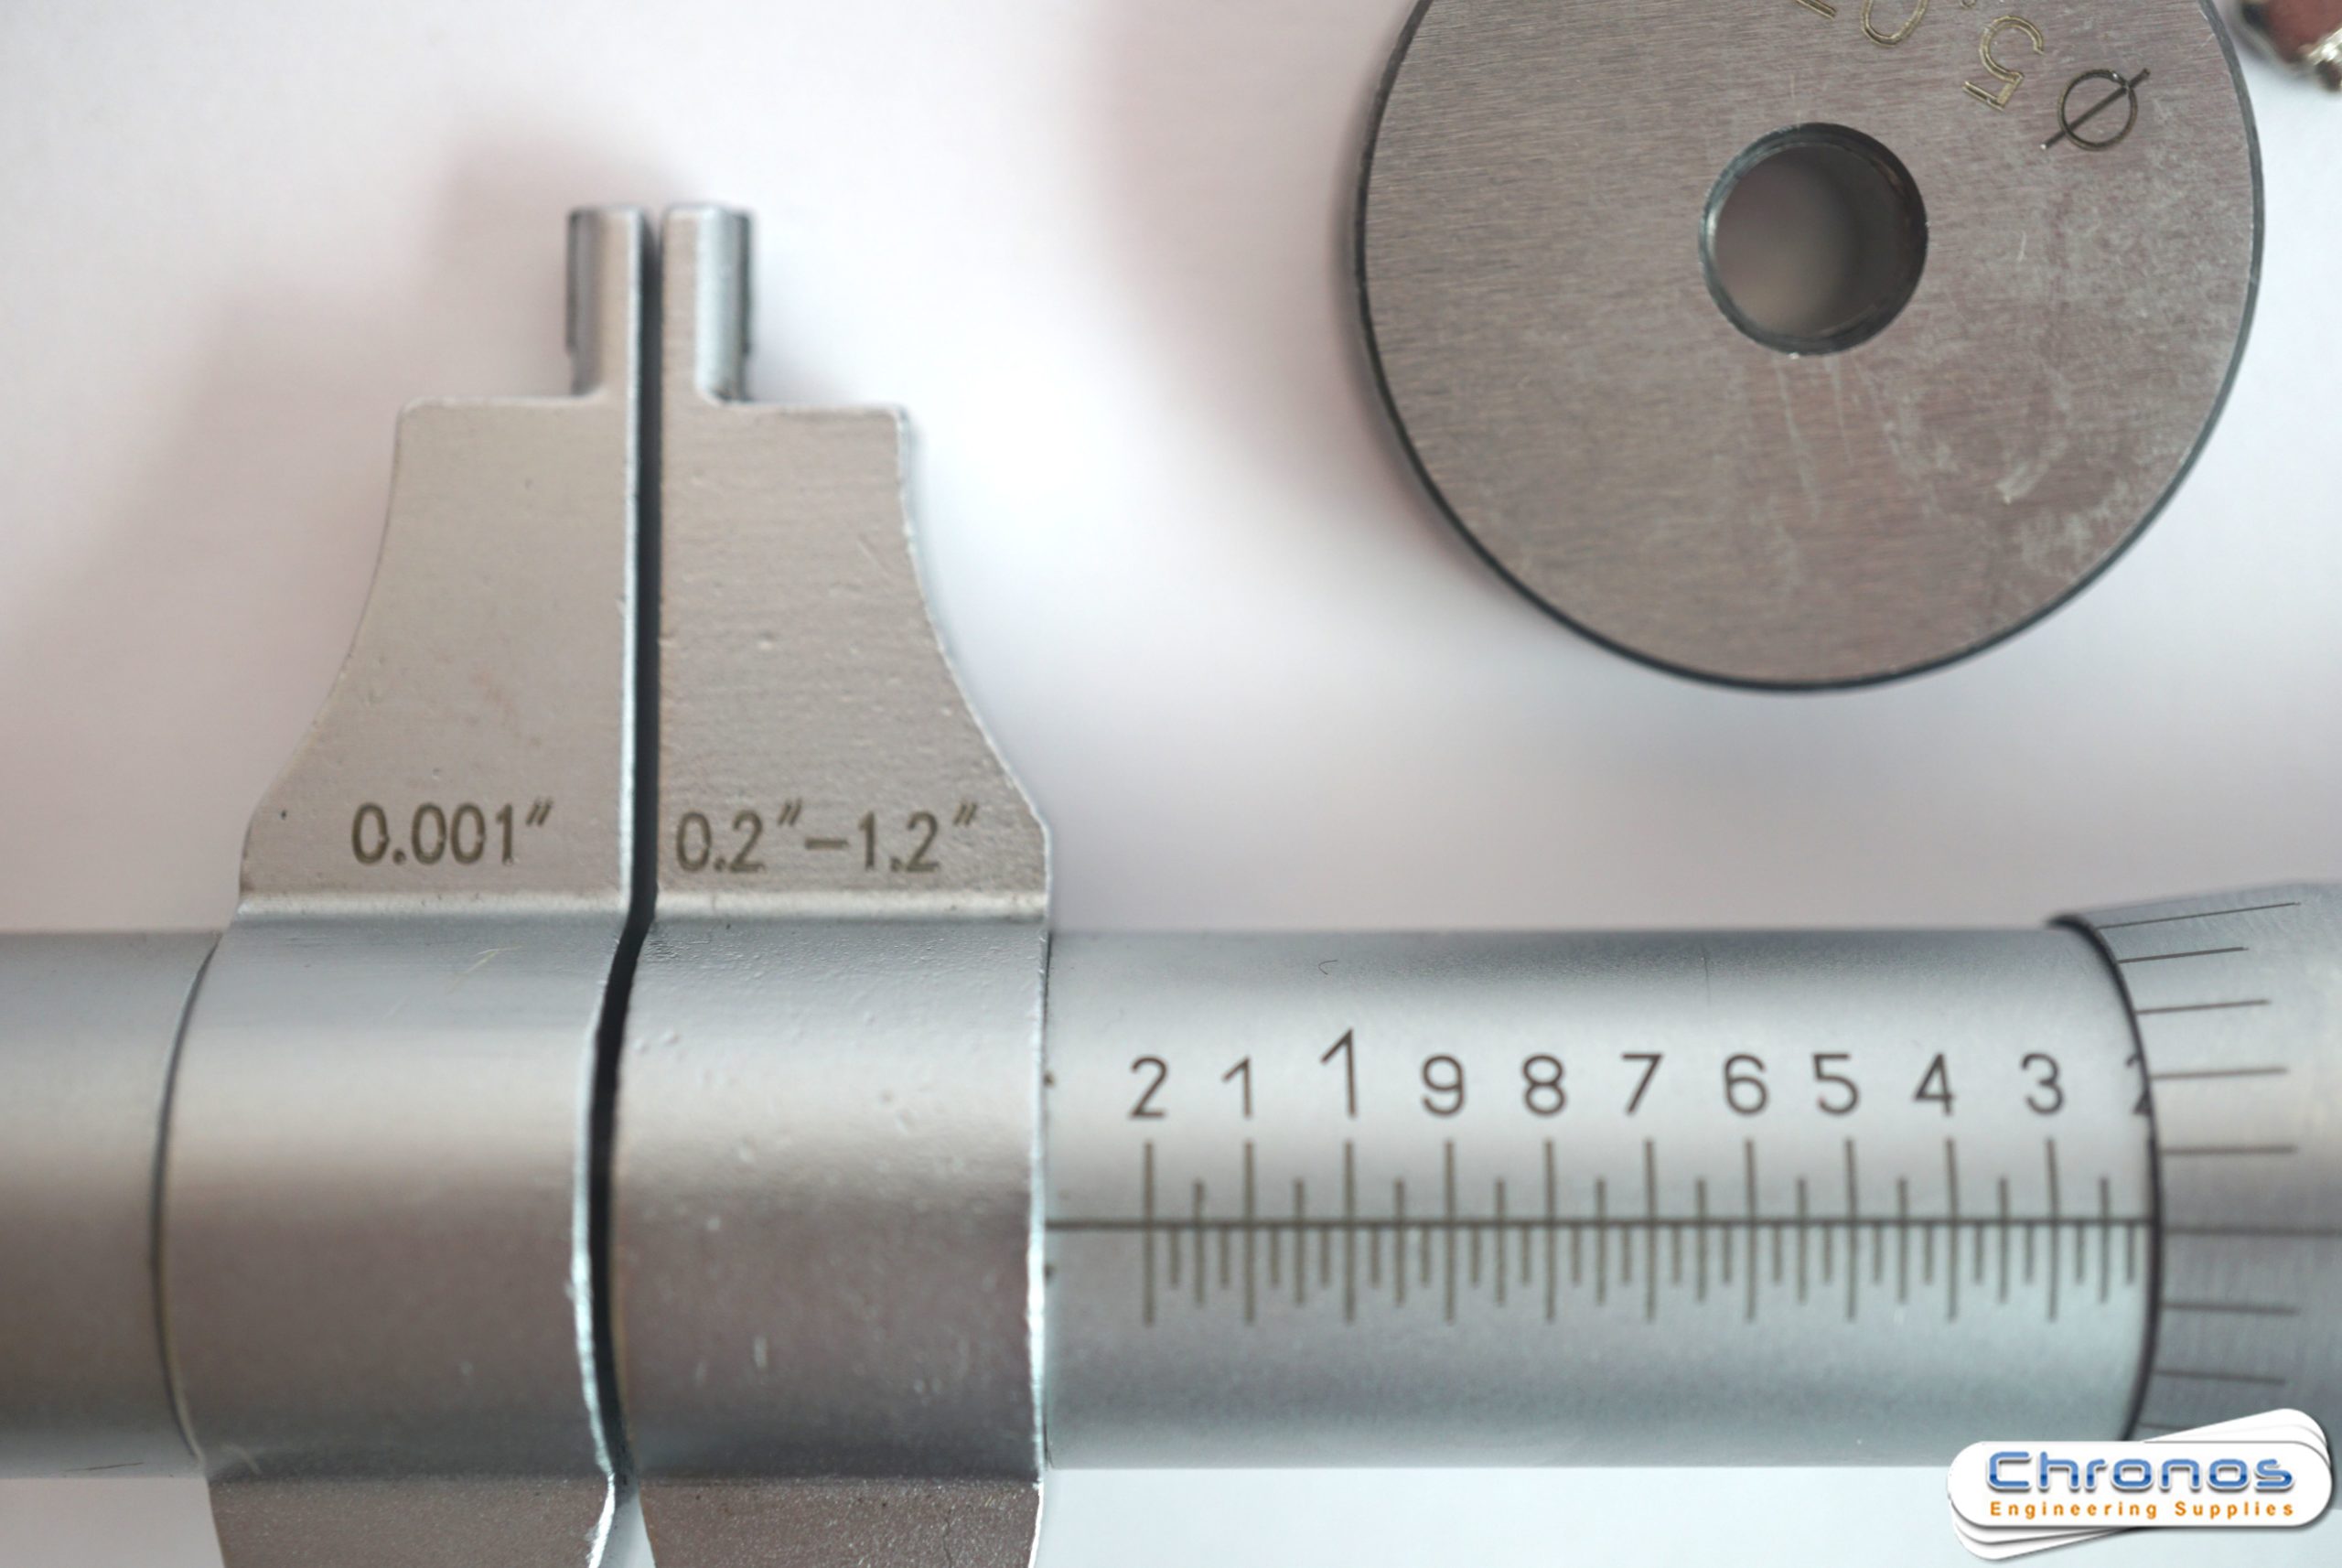 4312-5106 Details about   DASQUA 2-4" 0.001" INSIDE TUBE MICROMETER 